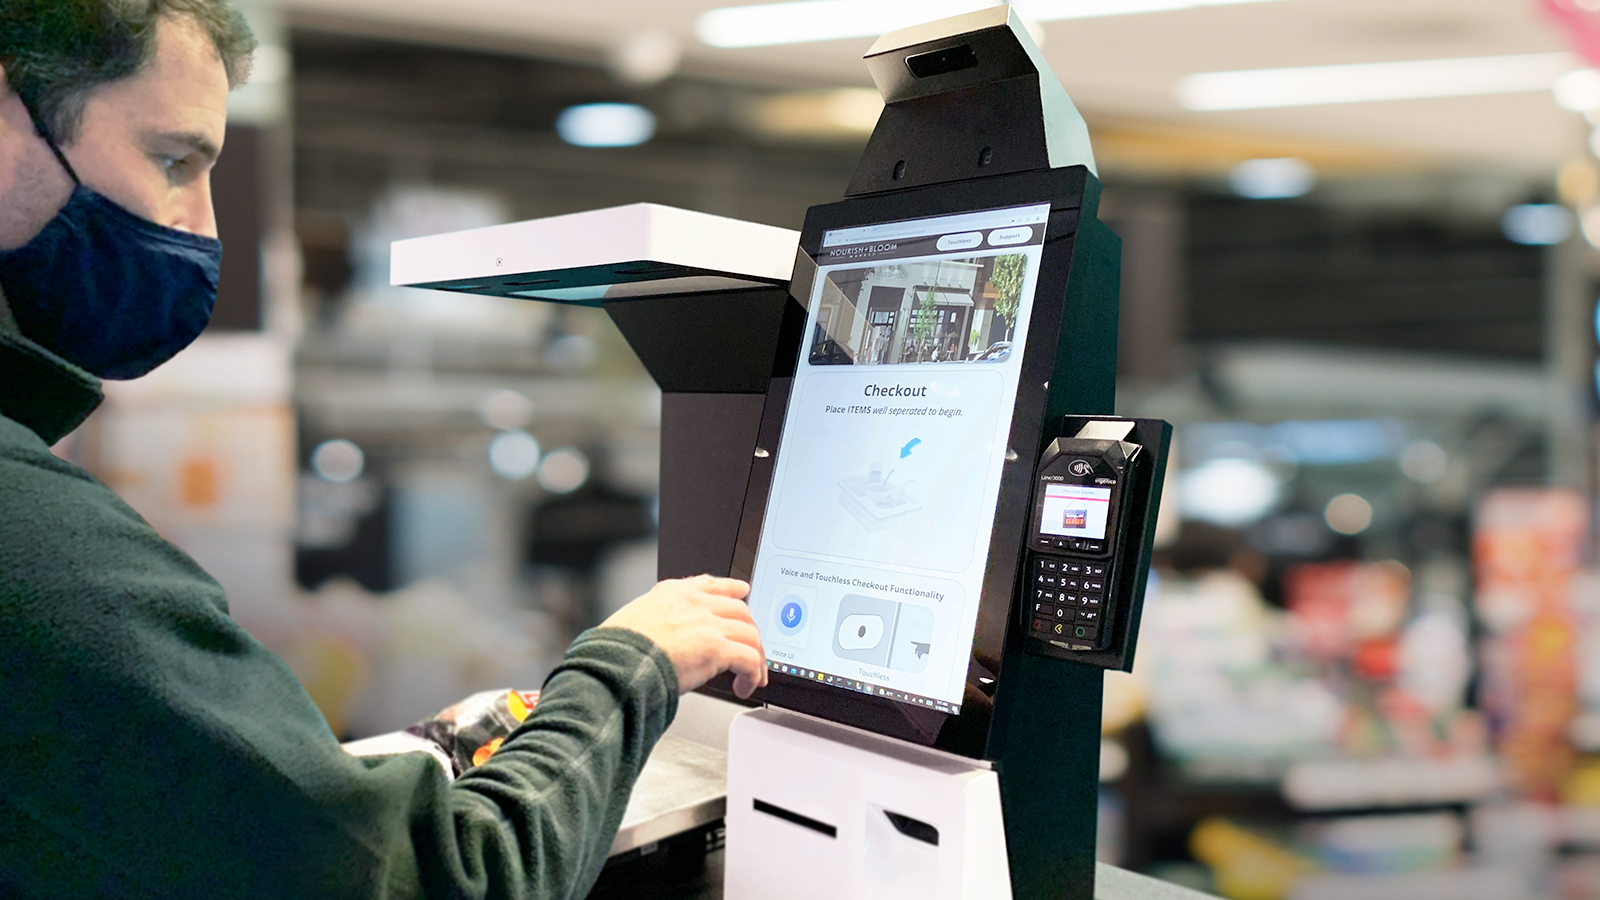 Self checkout kiosk with touchless interface